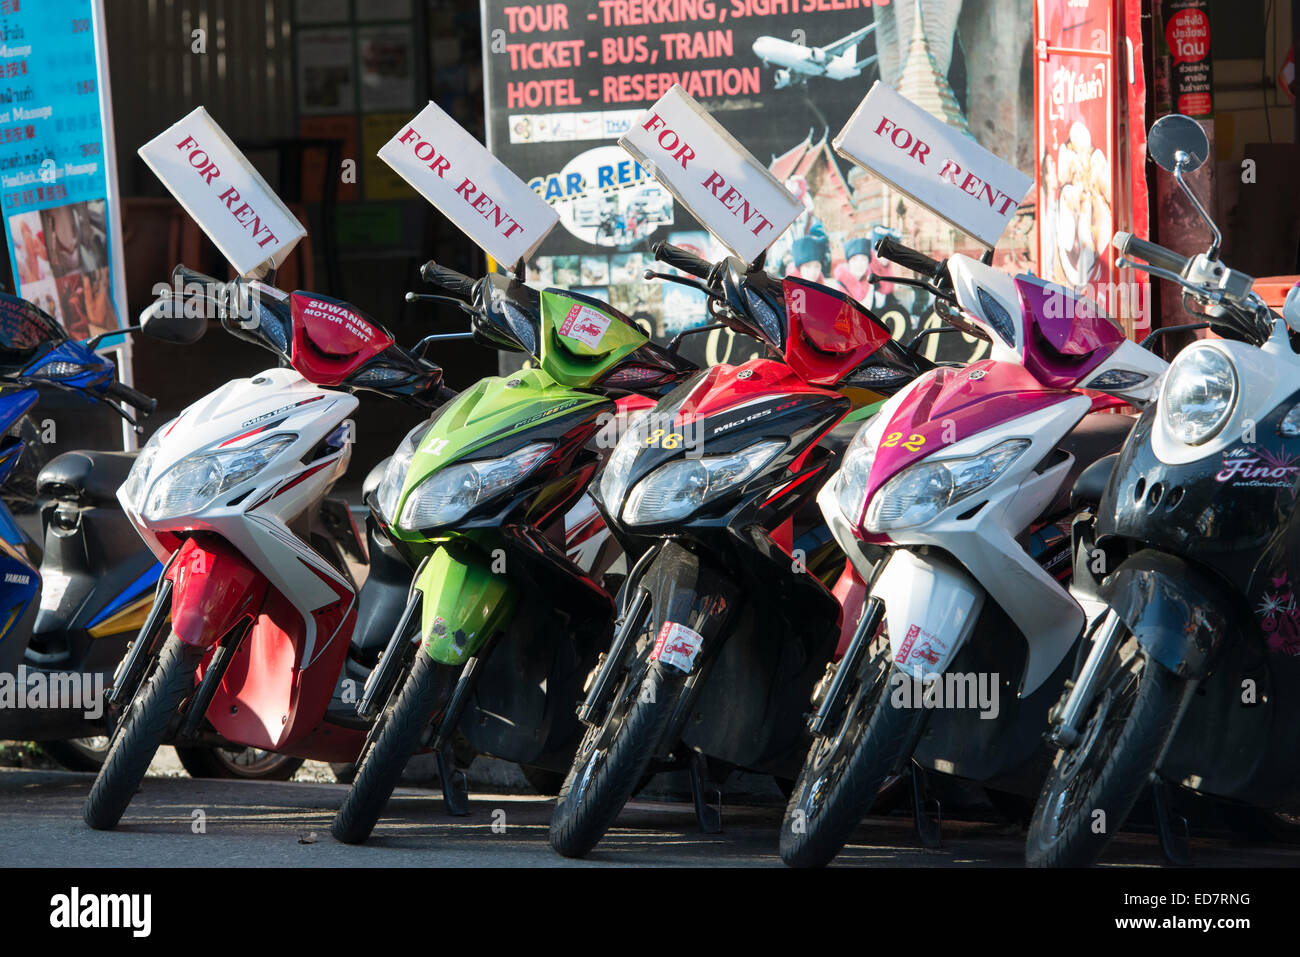 A Row of Motor Cycle for Rent in Chiang Mai, Thailand Stock Photo